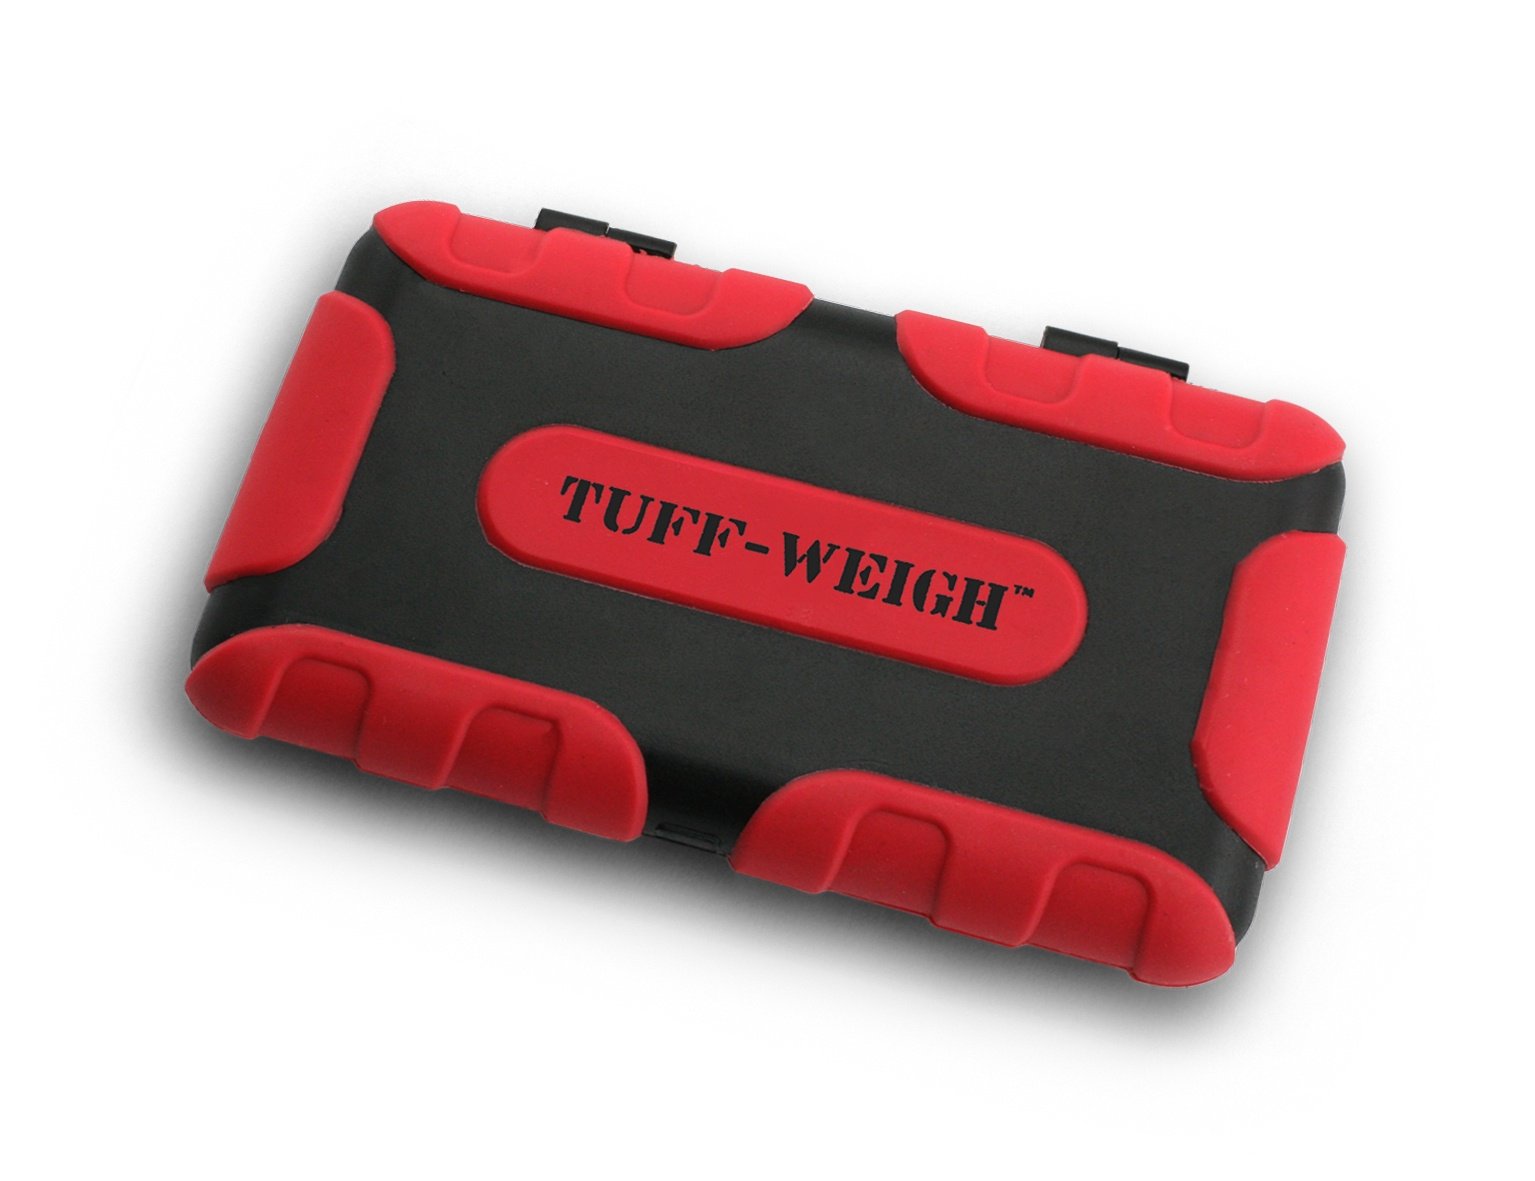 Tuff-Weigh (100g x 0.01g) Impact Resistant Scale with Rubber Grips - RED